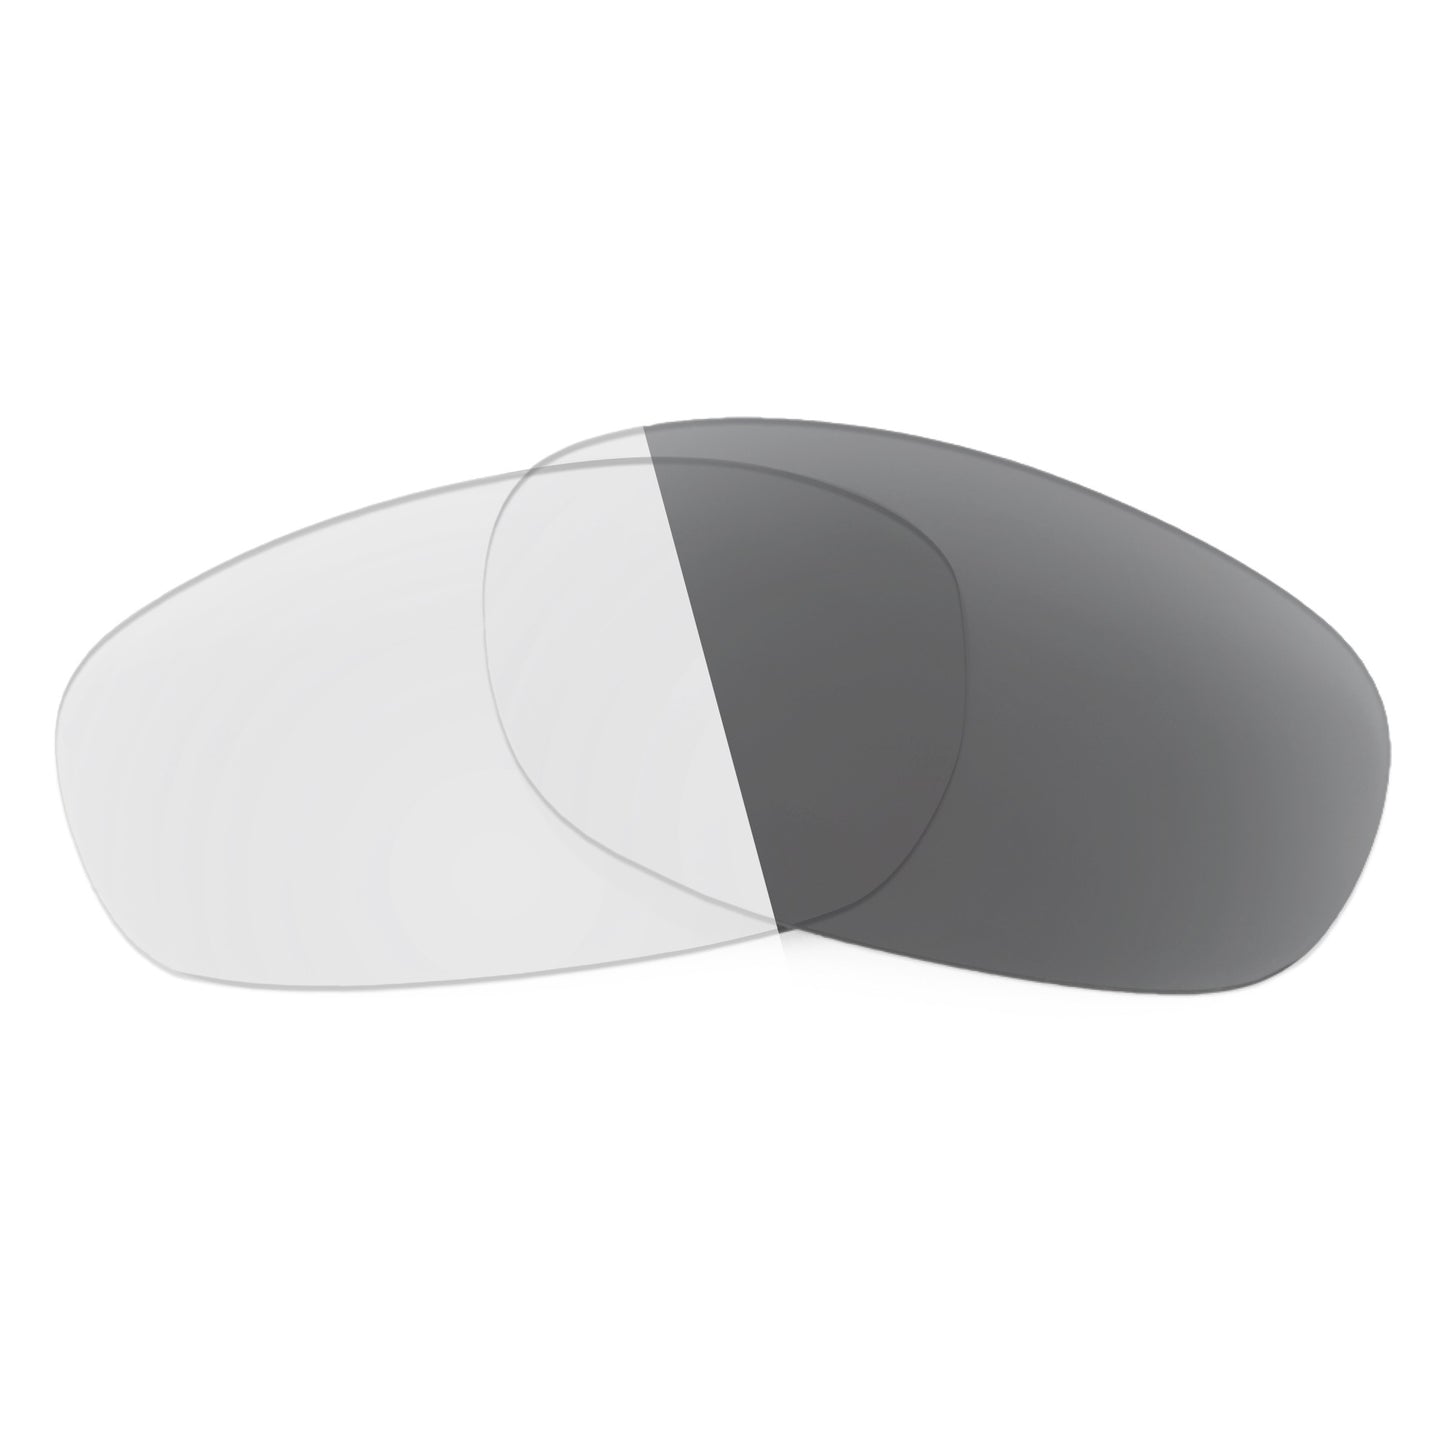 Revant replacement lenses for Ray-Ban RB4265 62mm Non-Polarized Adapt Gray Photochromic